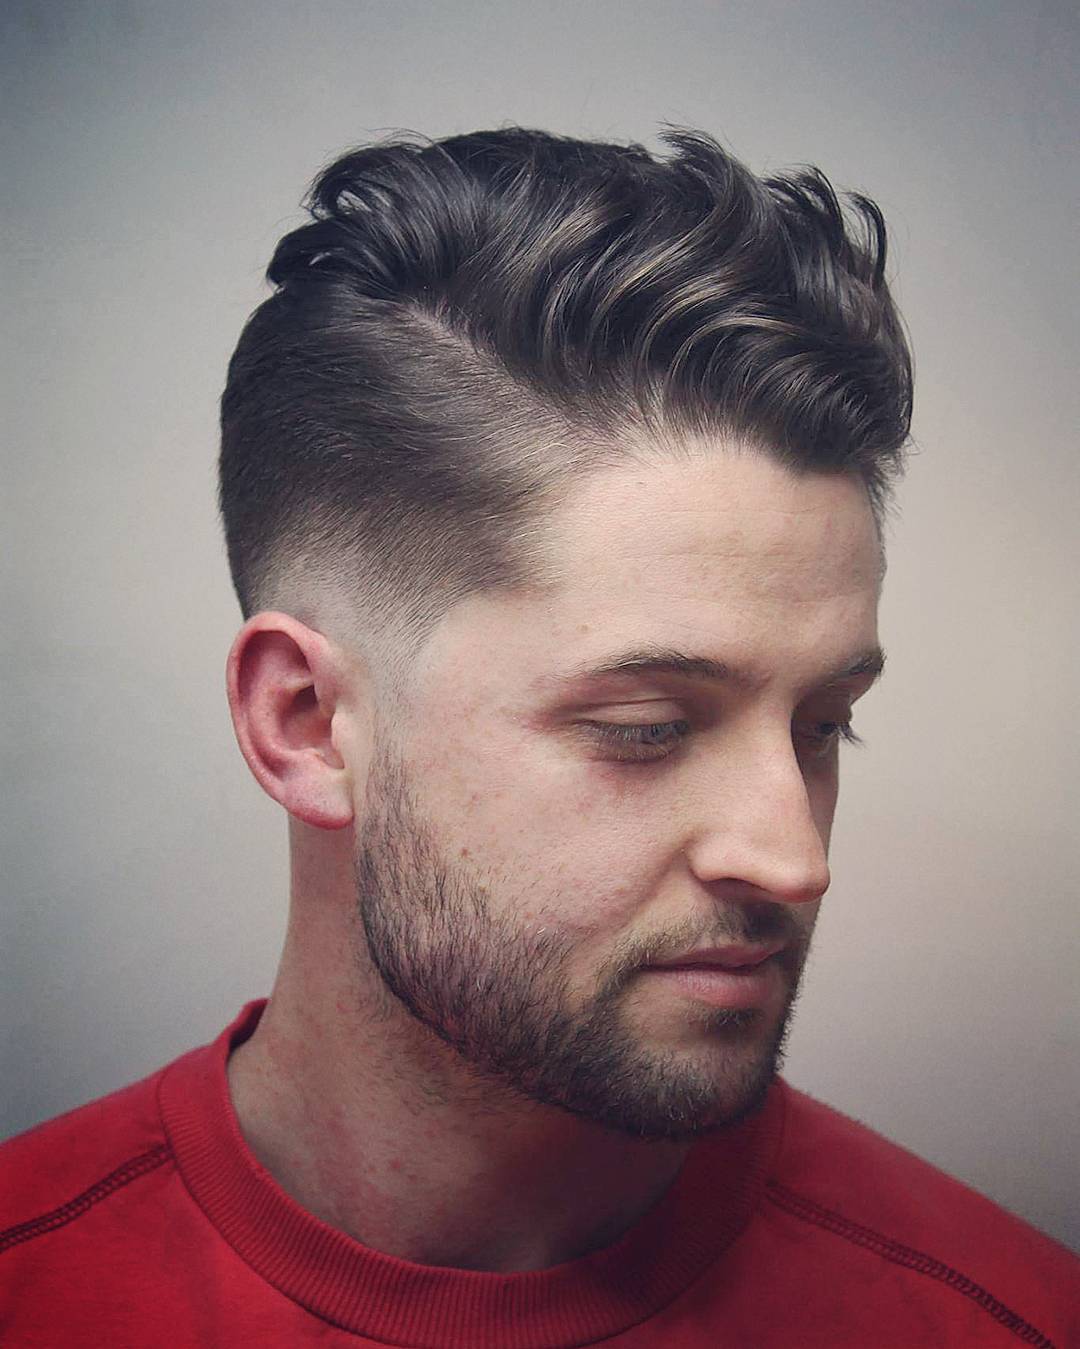 The 8 Best Men S Hairstyles For 2020 The Modest Man